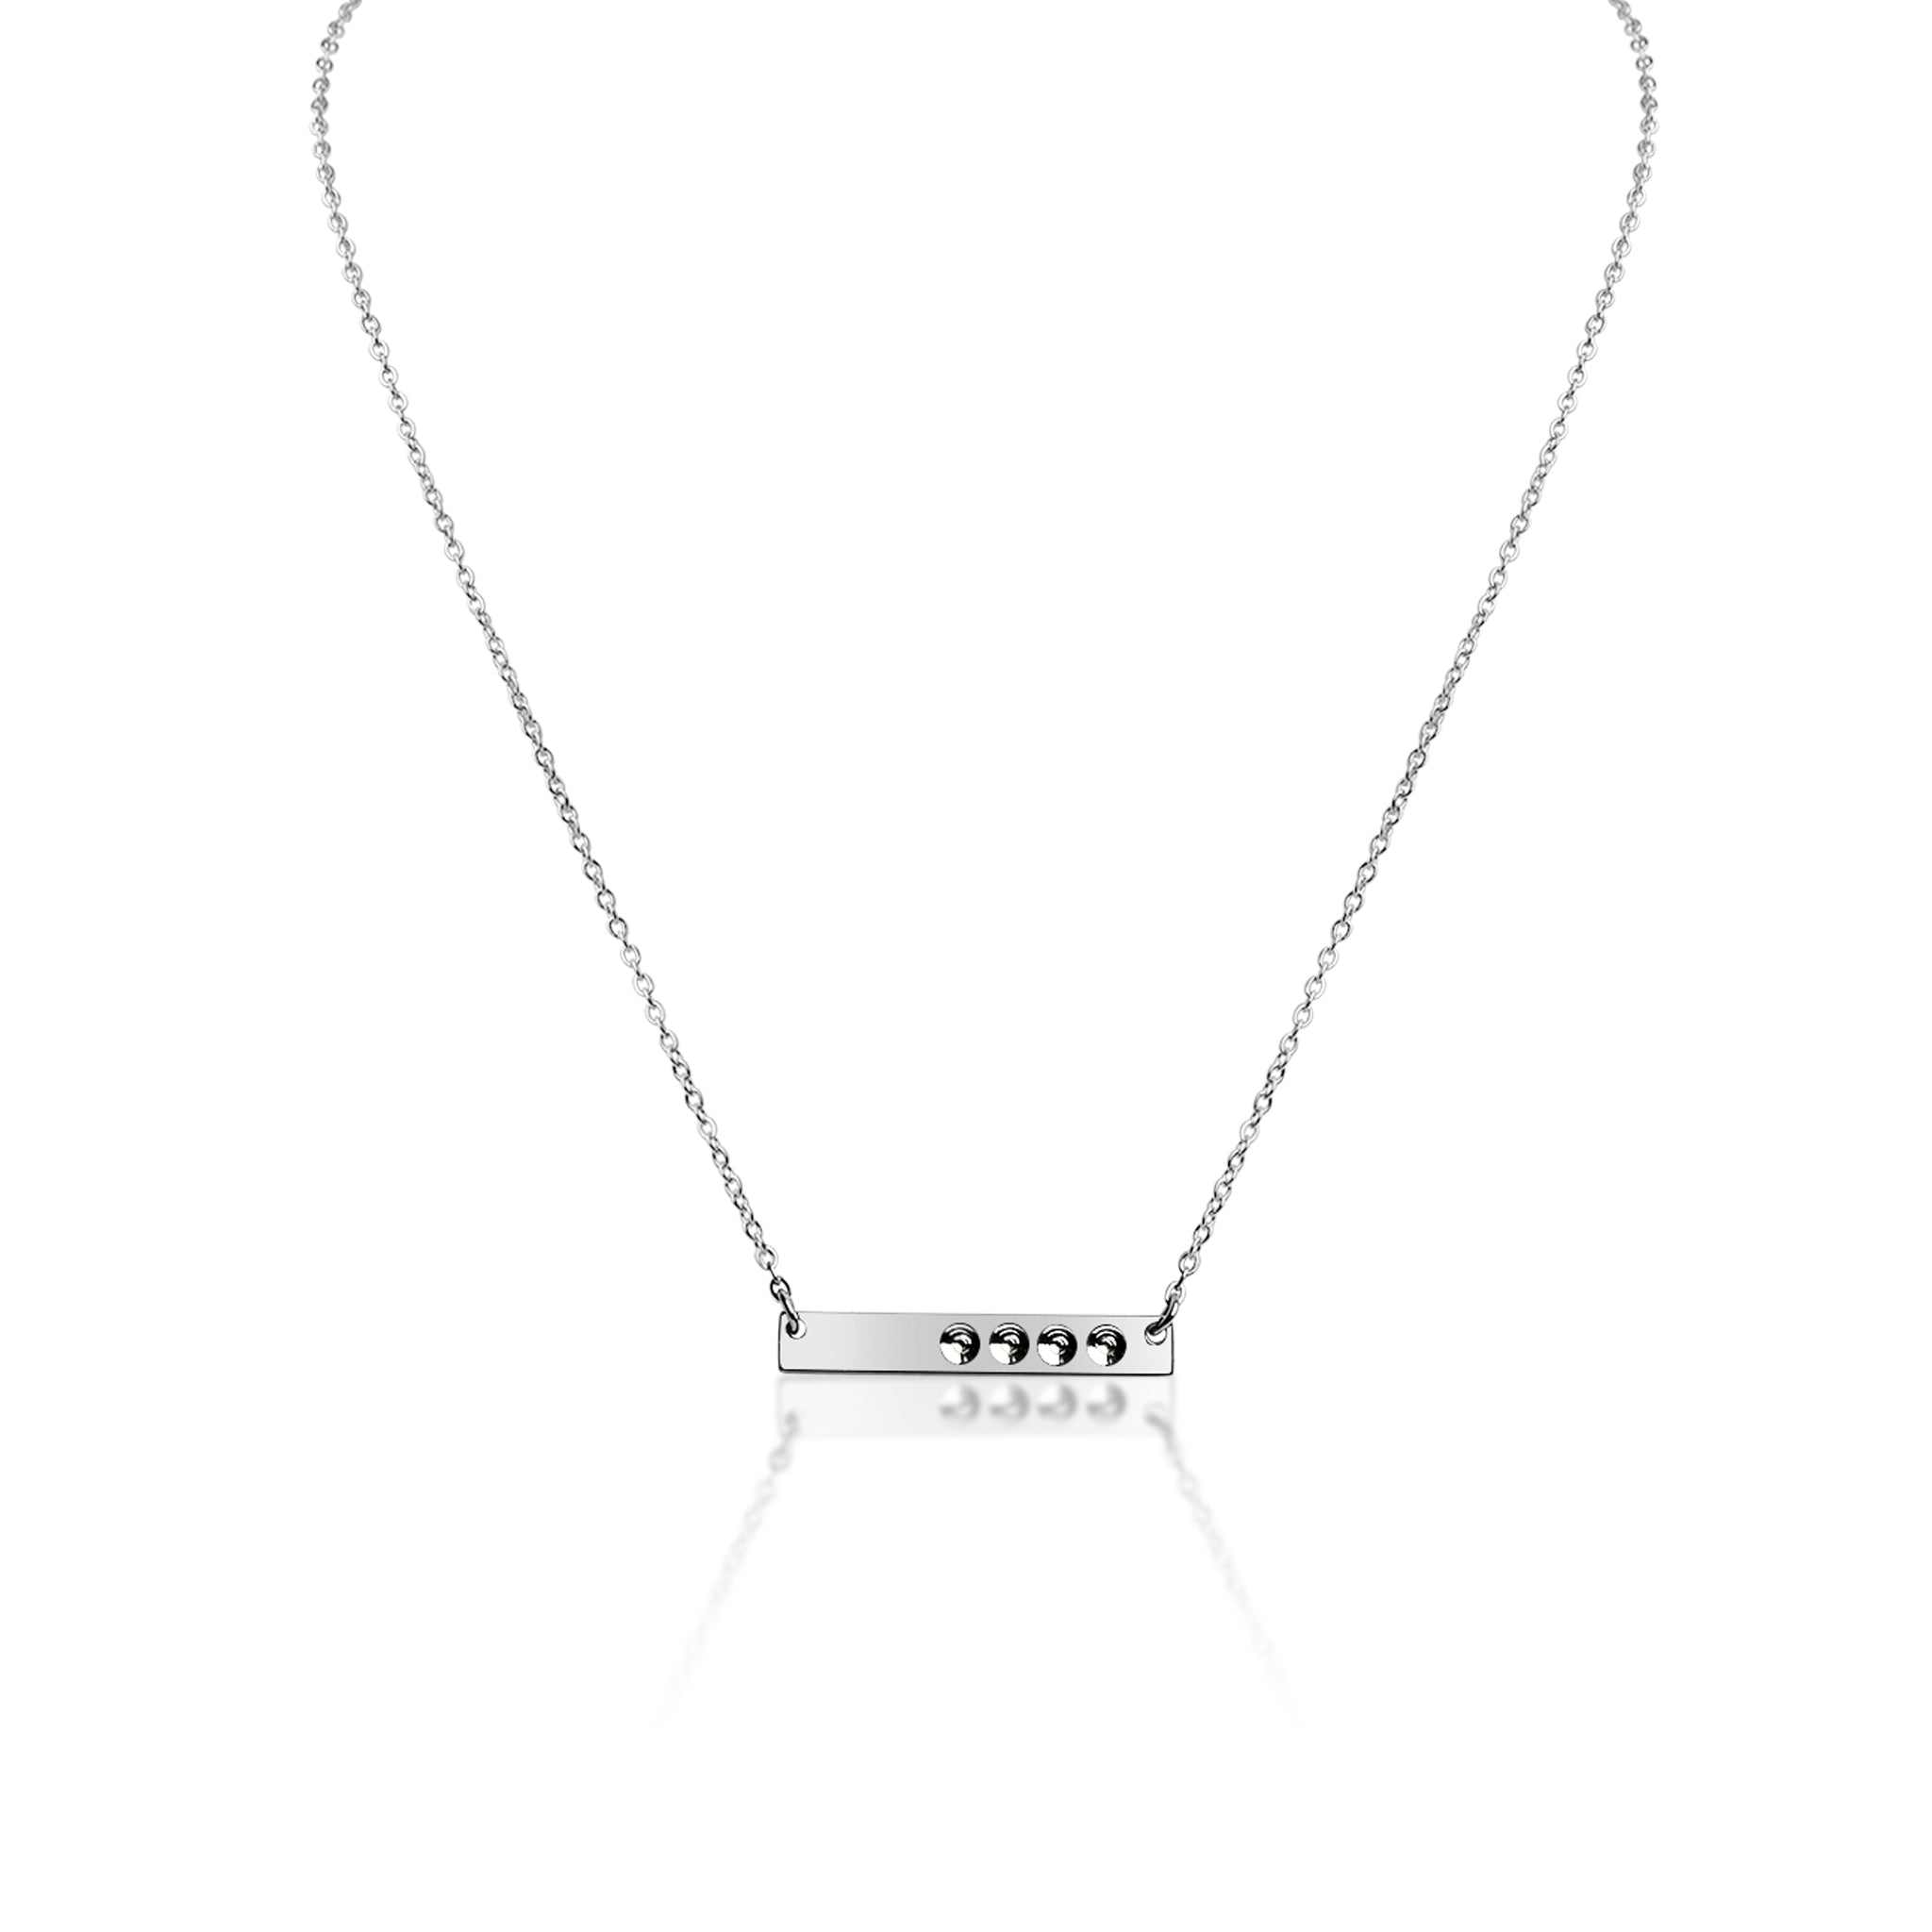 Polished Stainless Steel Stampable Necklace Sbb00114 – Wholesale ...